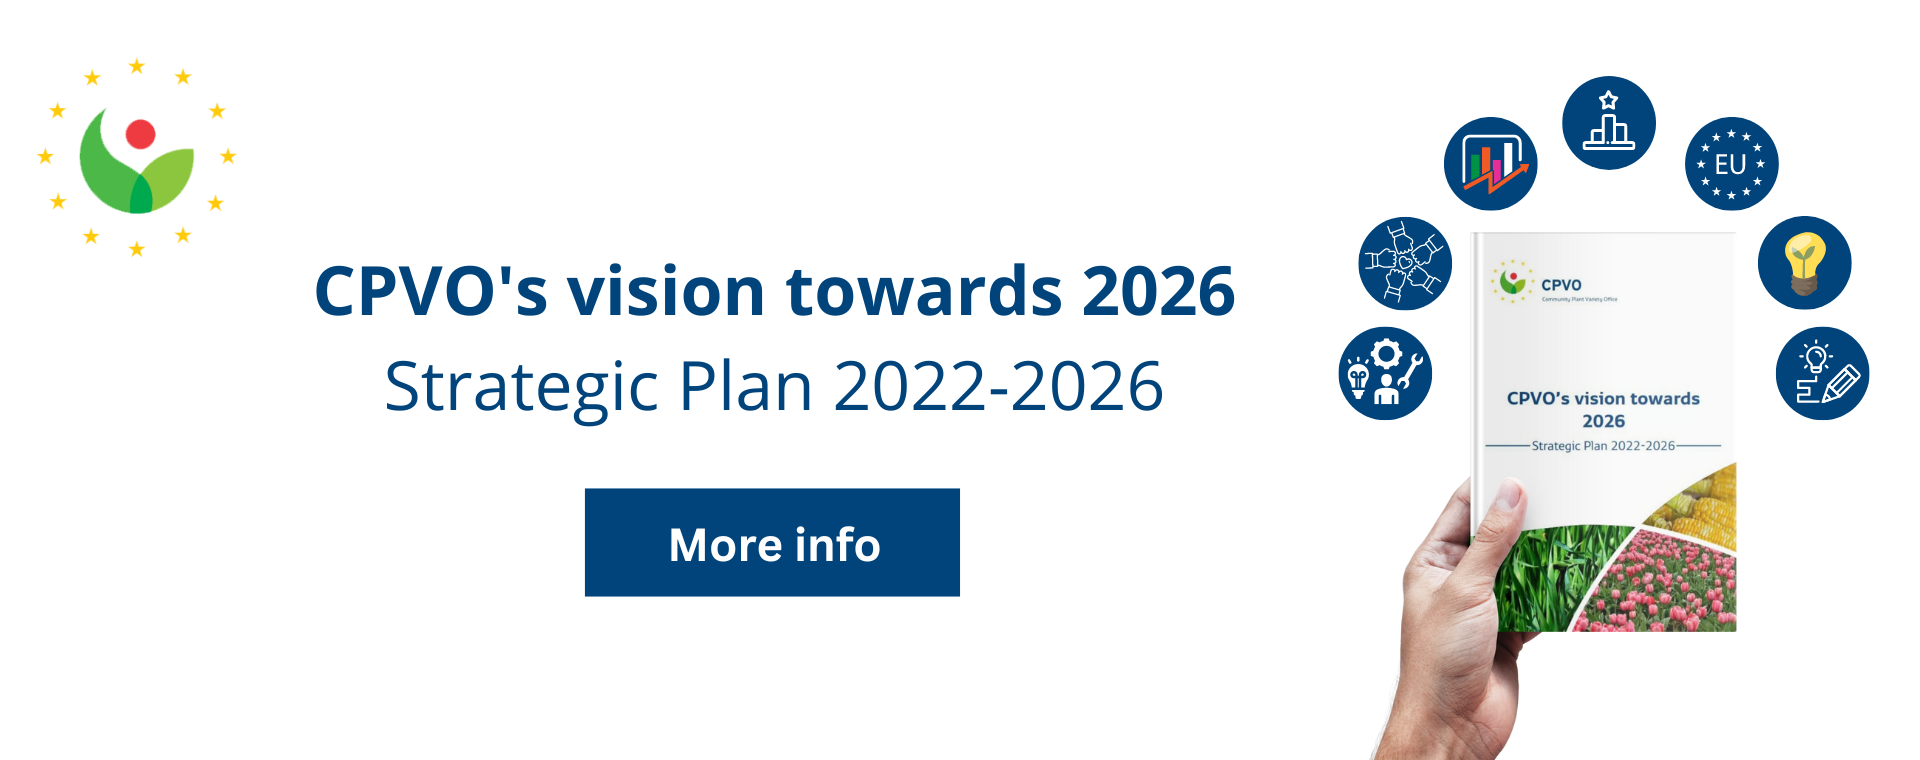 CPVO'S vision towards 2026